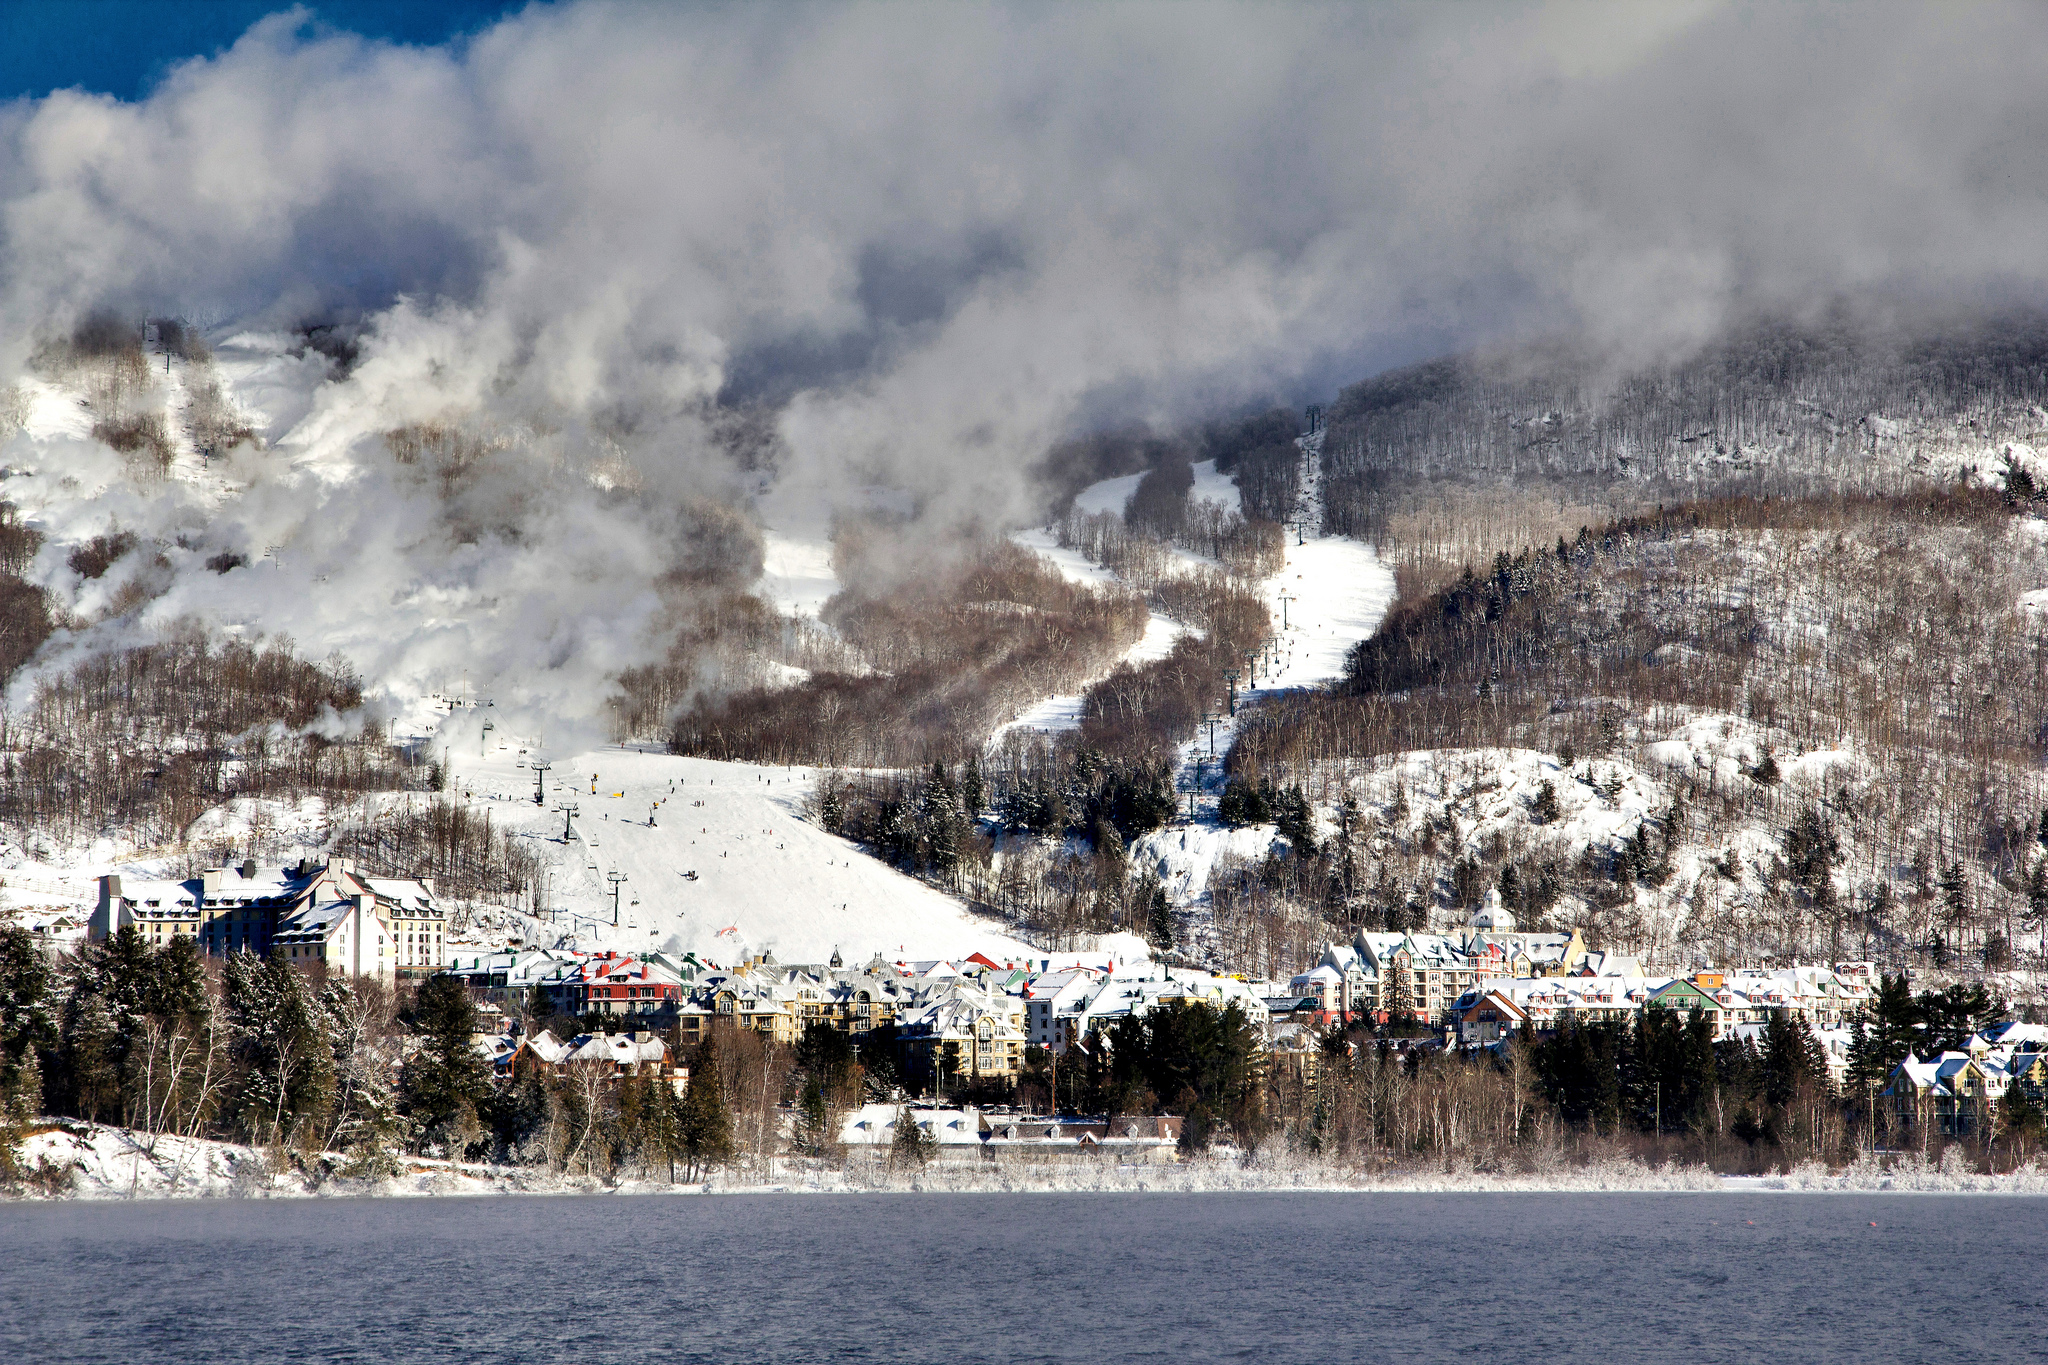 The magnificent ski slopes are a big must do in Mont Tremblant ... photo by CC user arturstaszewski on Flickr